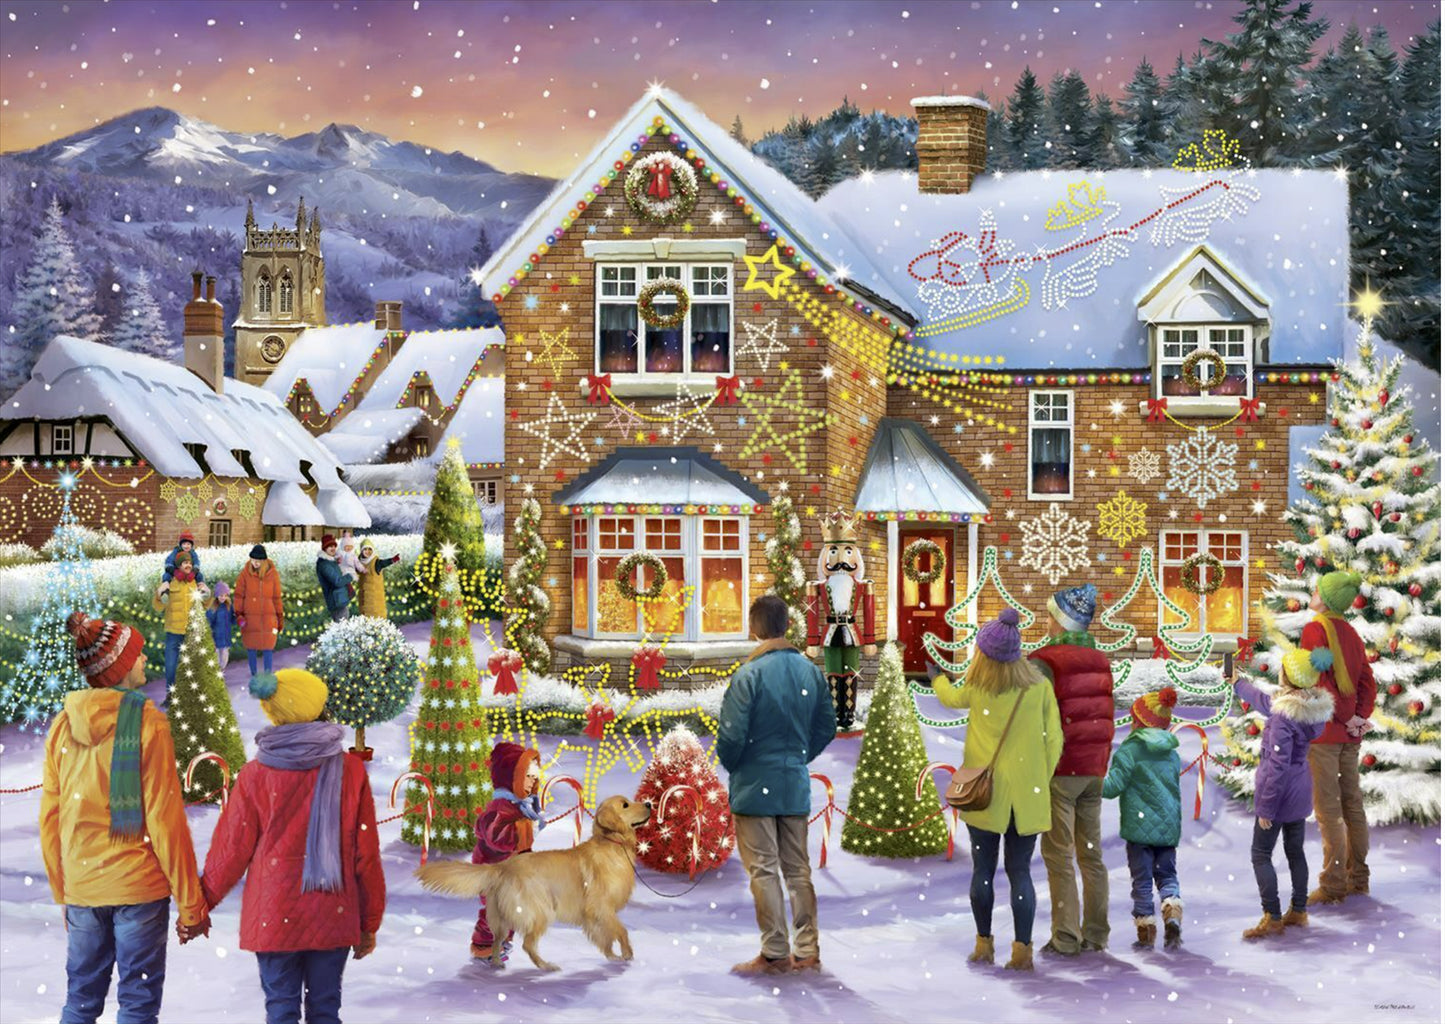 Dressed Up for Christmas 1000 Piece Jigsaw Puzzle